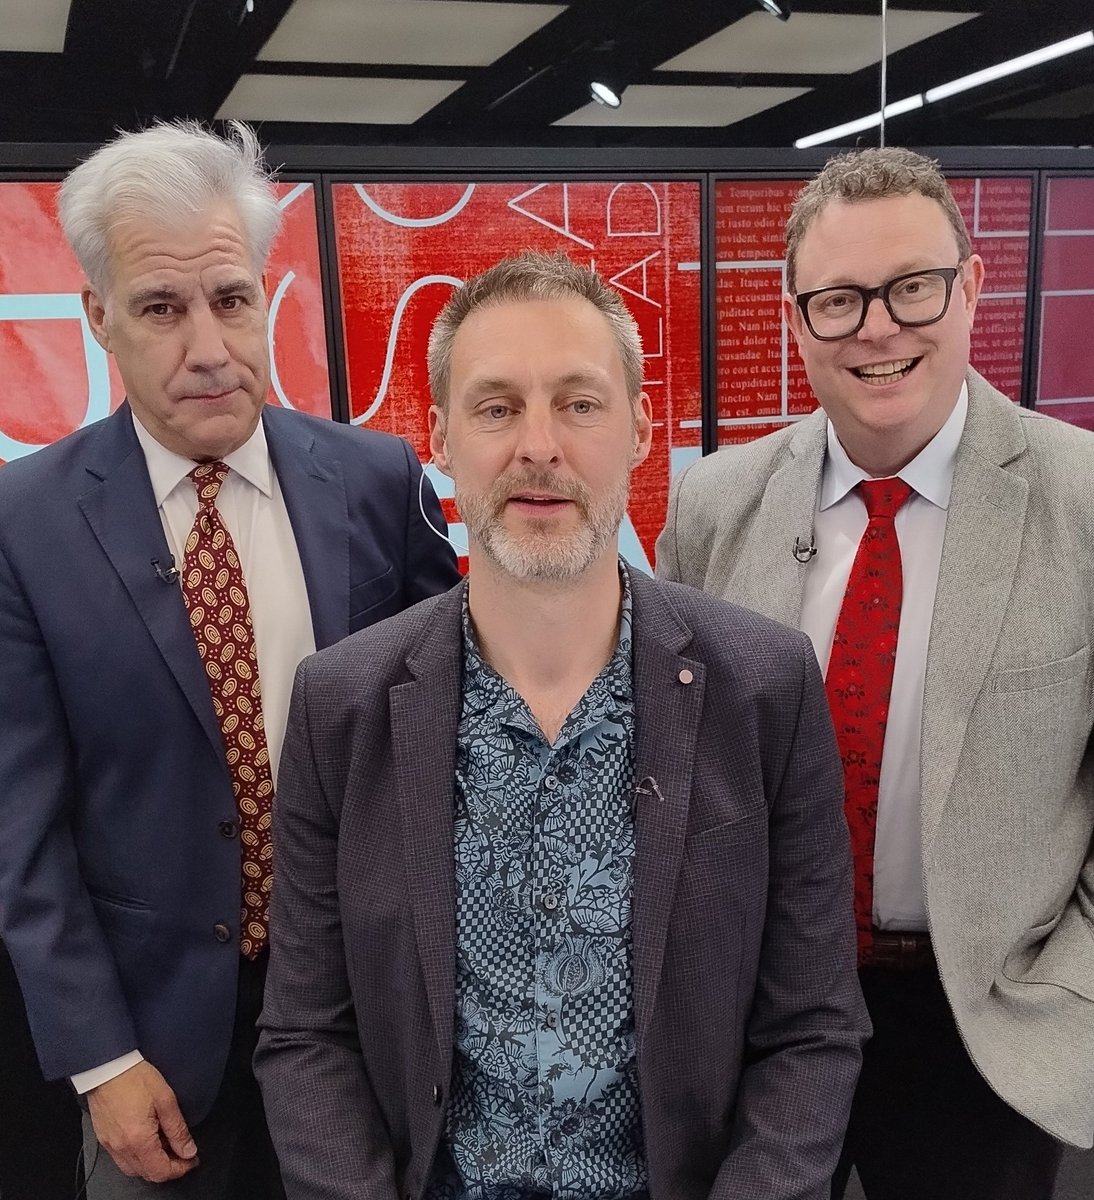 I’m back on @GBNEWS Headliner’s with @LeoKearse and @PaulCoxComedy. Pray there's more breaking news! The Dream Team! Friday, 11 PM UK 30th May 2024. 6 PM NYC. Freesat 216, Sky 512, Virgin 604, FreeView or YouView 236, Samsung 4326, SkyGlass 509, DAB, Radio, GBNews App, YouTube